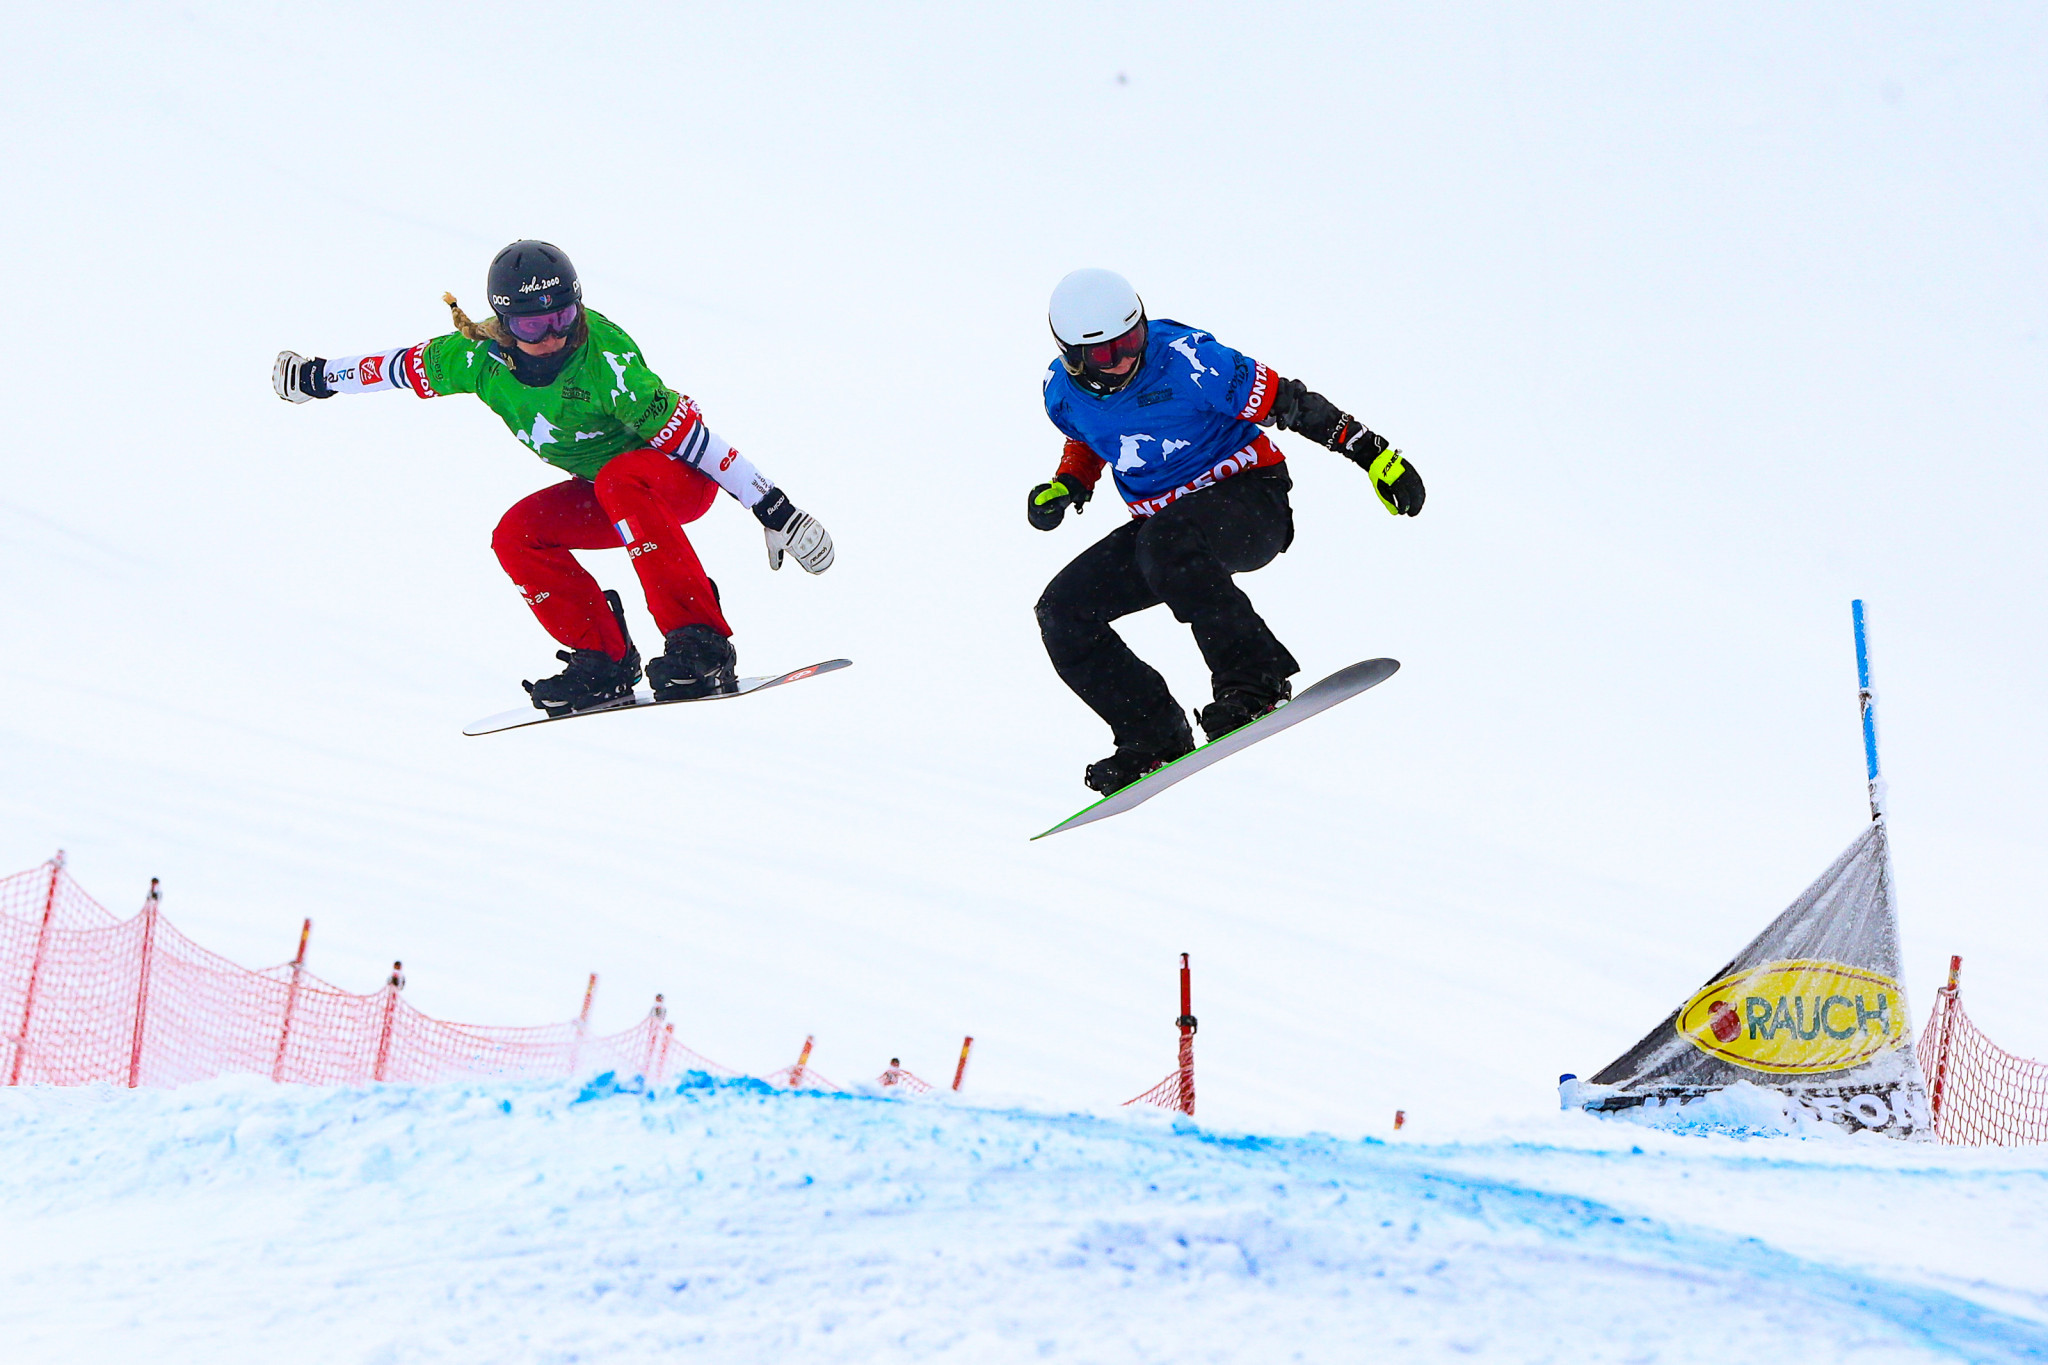 The Snowboard Cross World Cup leg in Feldberg has been cancelled due to the coronavirus pandemic ©Getty Images 